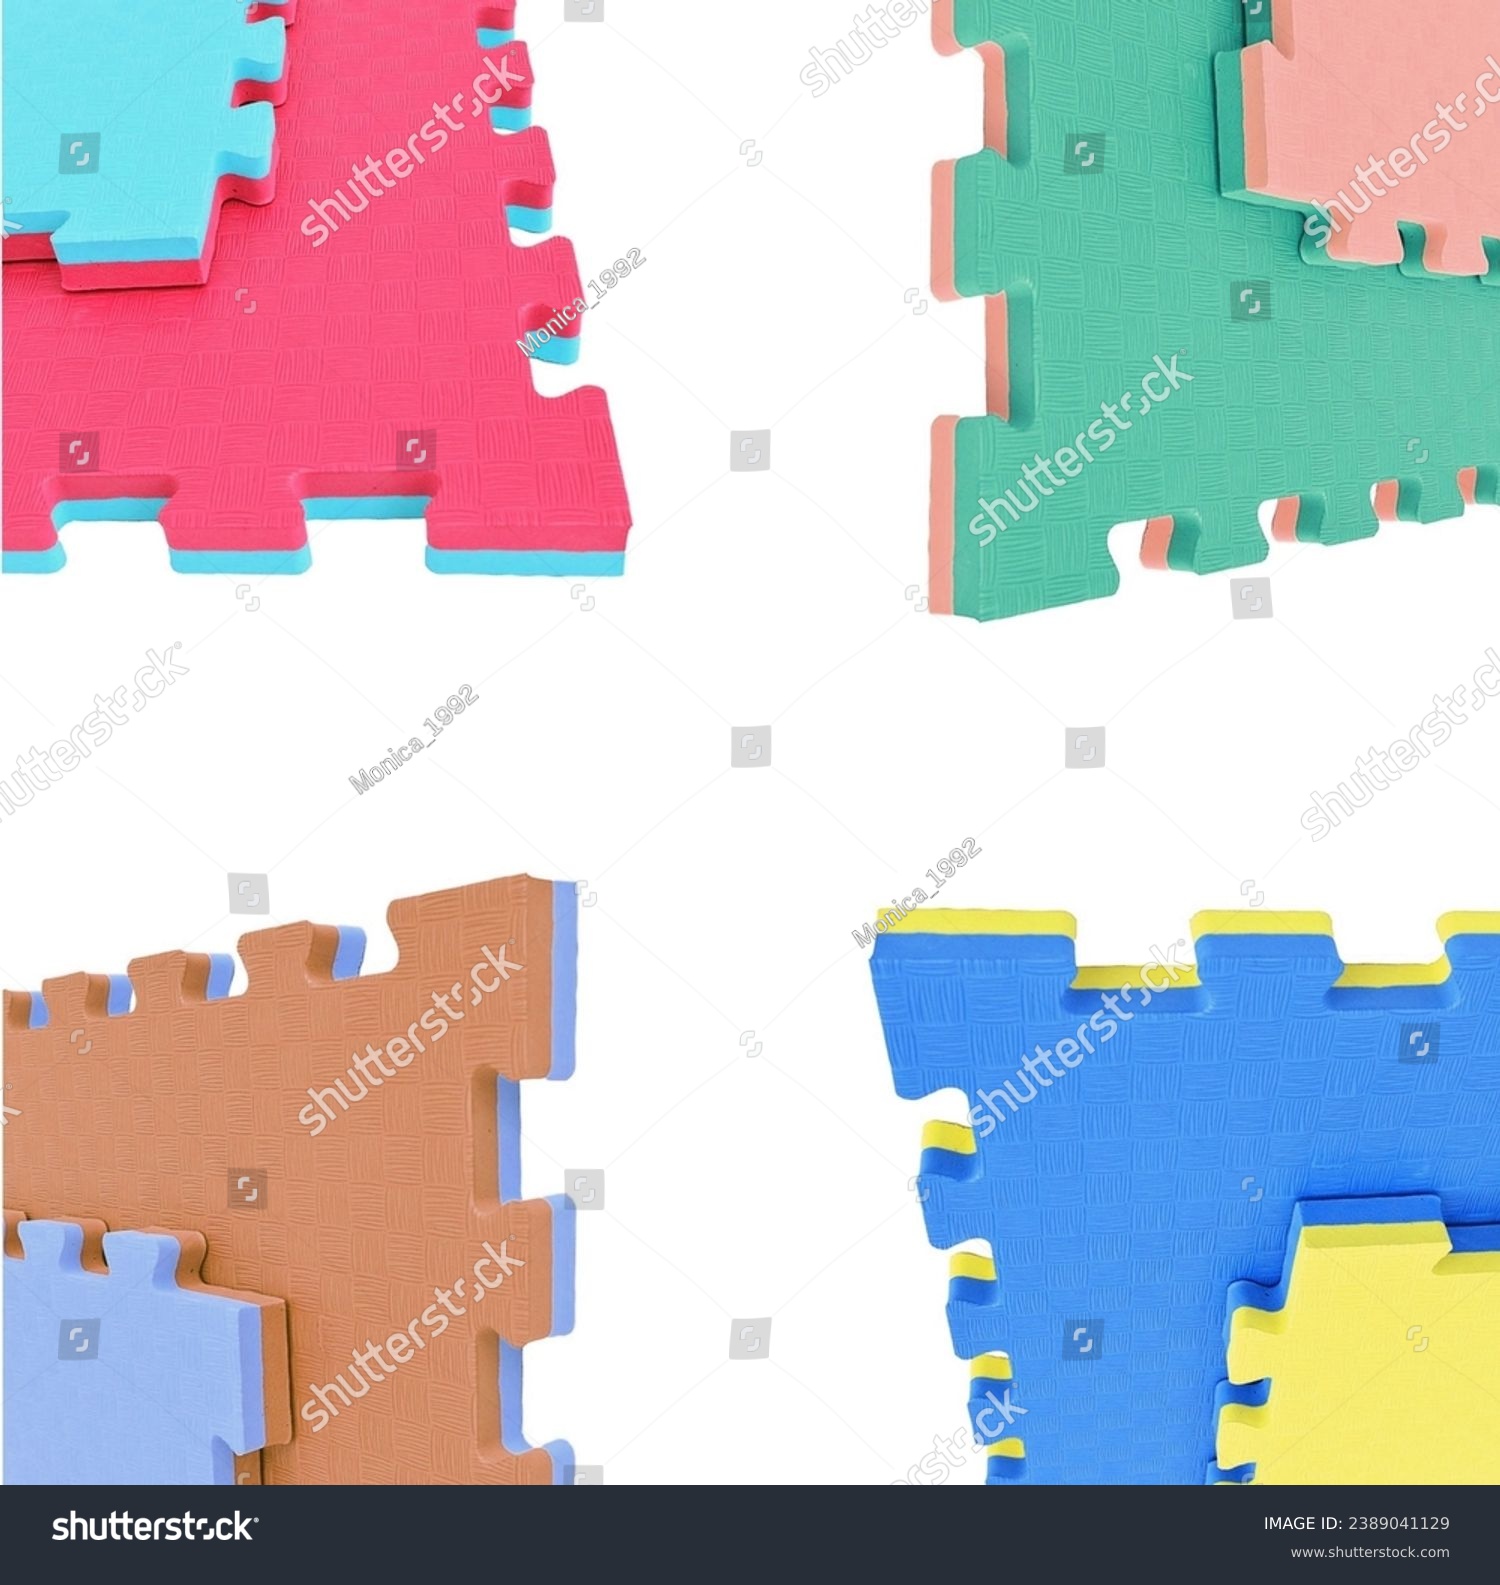 Colored rubber for tatami dojang. Eva rubber to cushion physical activity, bouncing, exercises, mats and mattresses. Avoid falls, practice safe sports. Rubber martial arts isolated on white background #2389041129